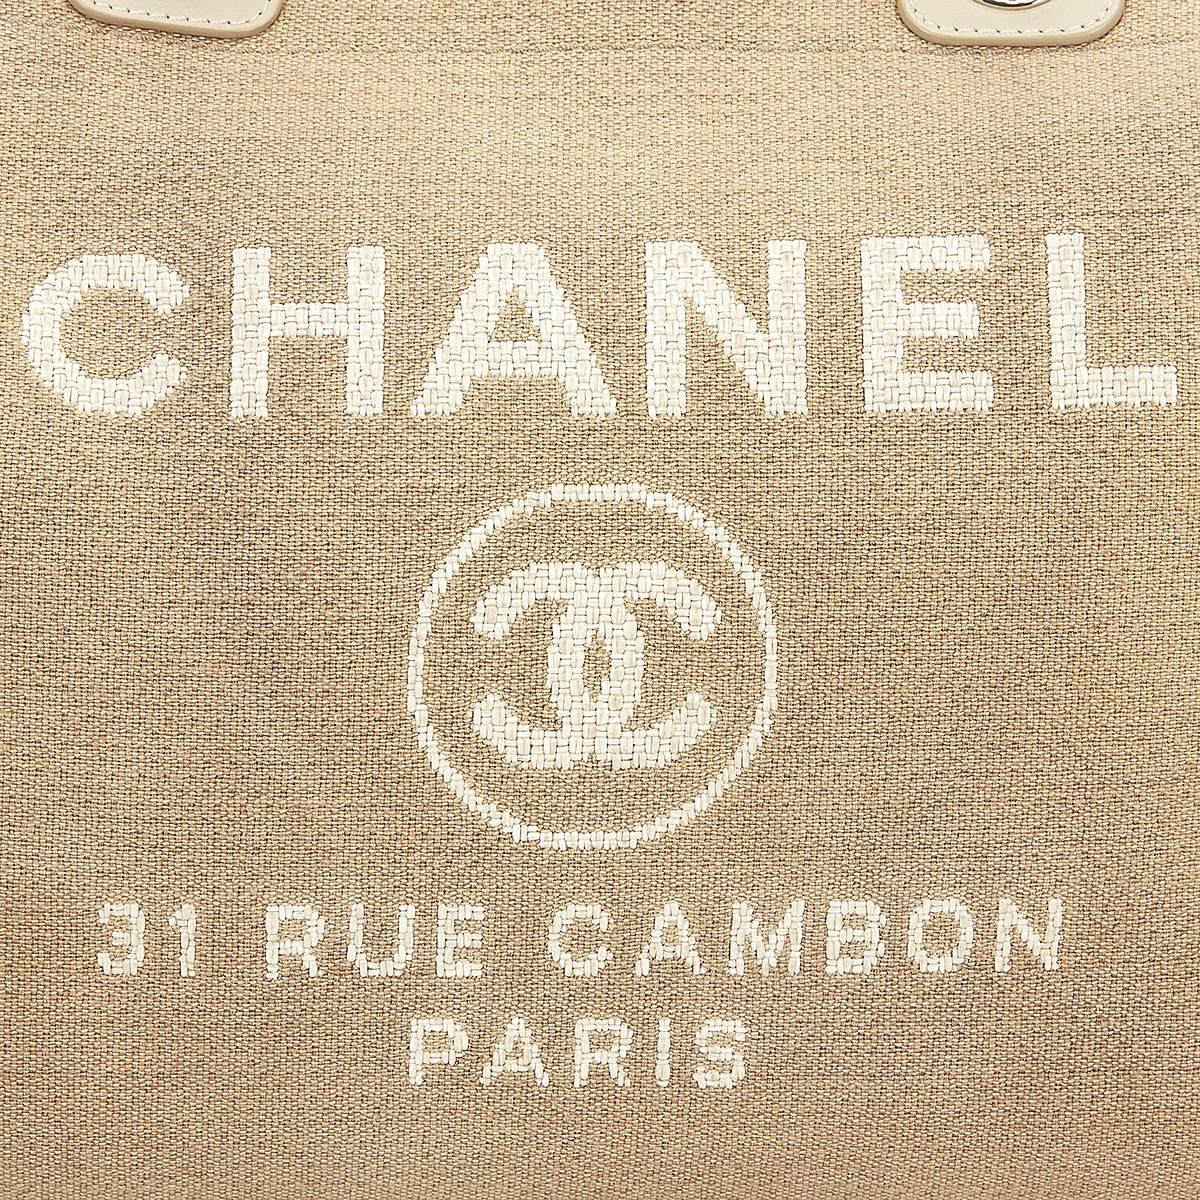 2013 Chanel Beige Canvas Large Deauville Tote 1